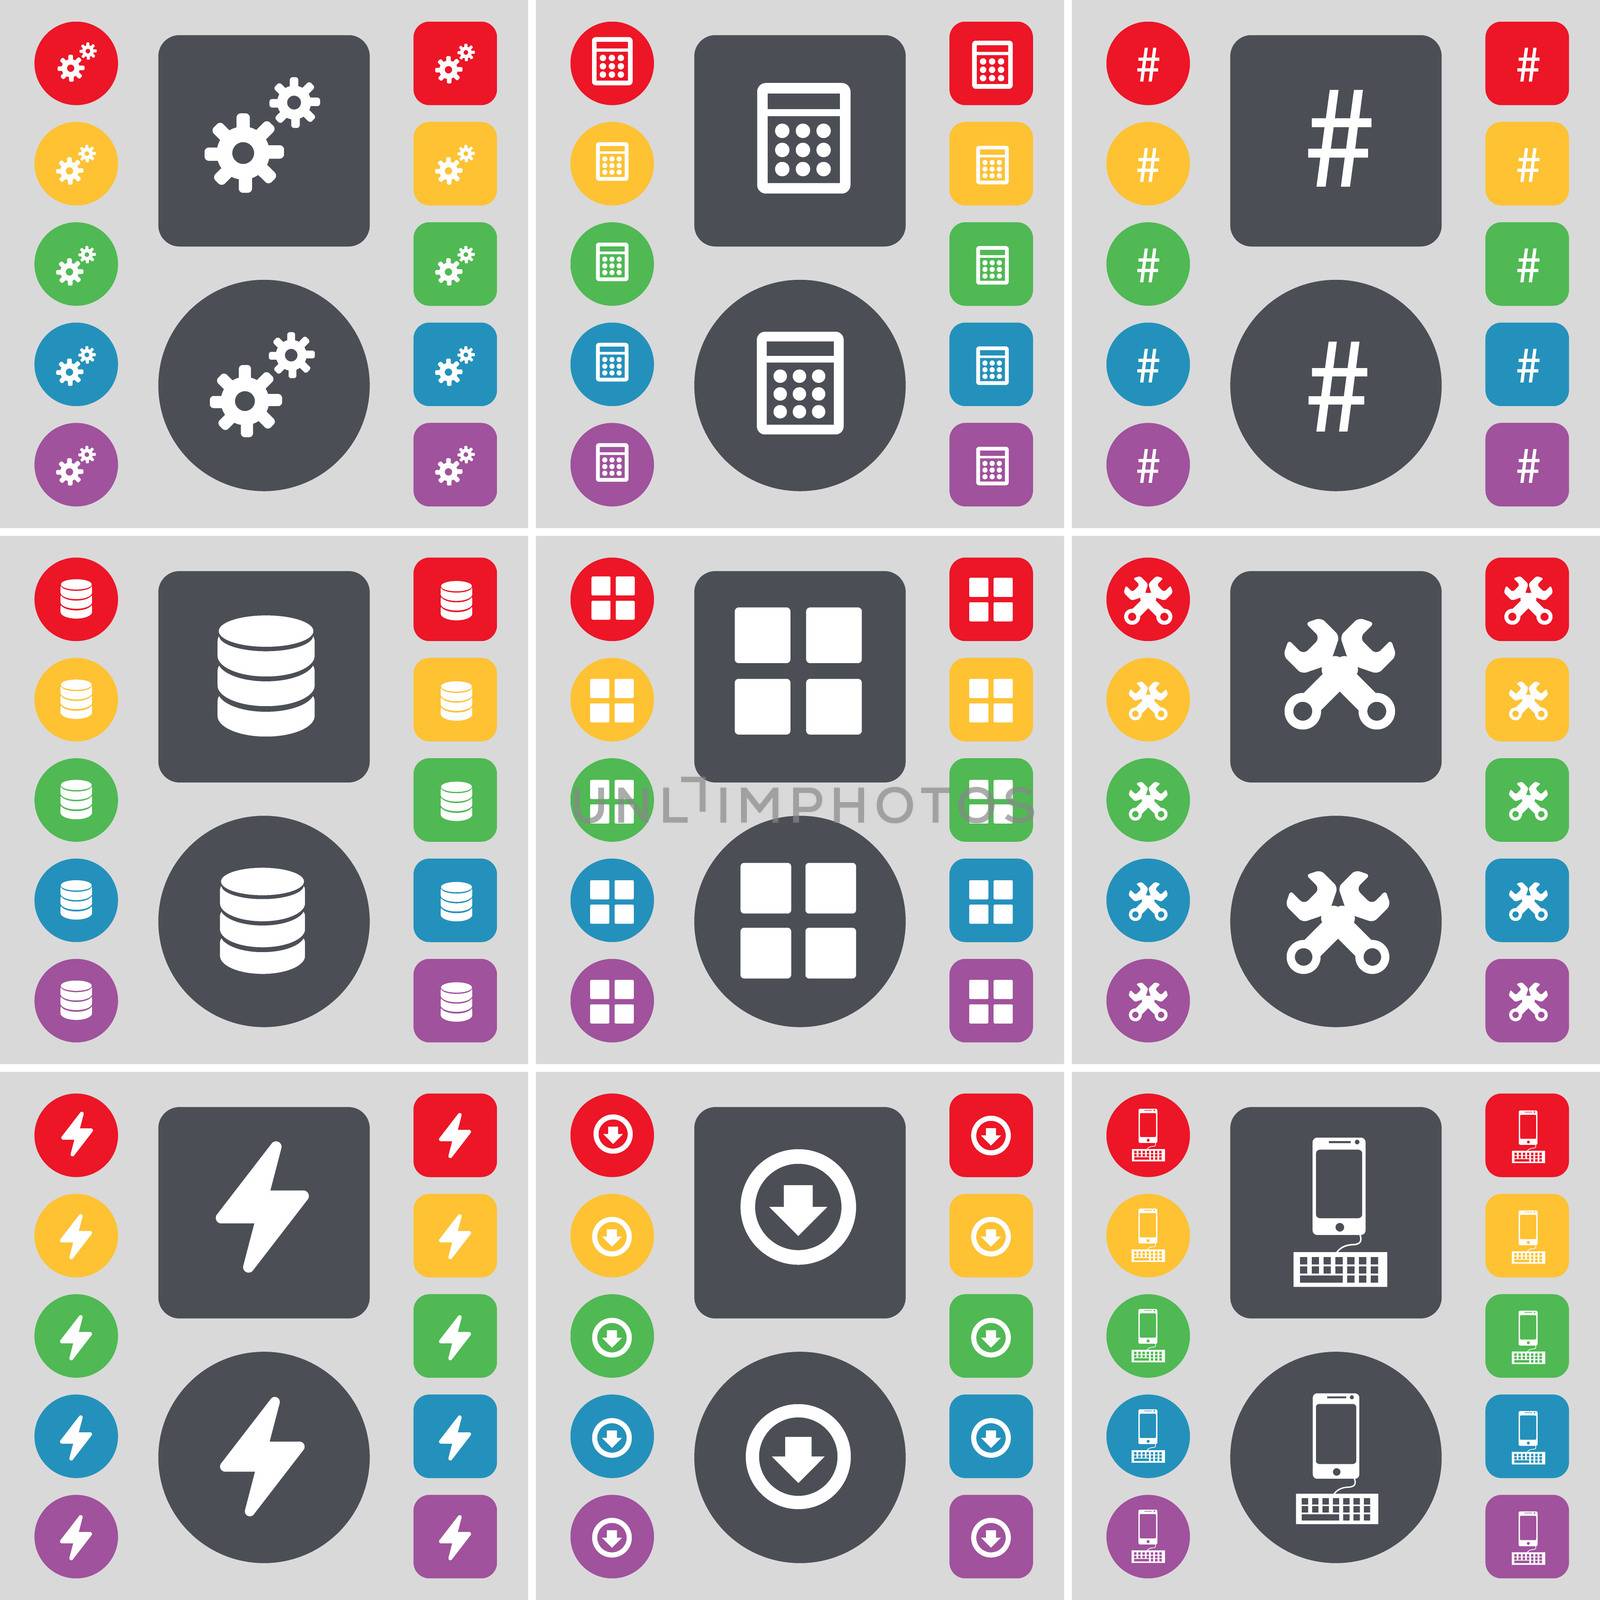 Gear, Calculator, Hashtag, Database, Apps, Wrench, Flash, Arrow down, Smartphone icon symbol. A large set of flat, colored buttons for your design.  by serhii_lohvyniuk